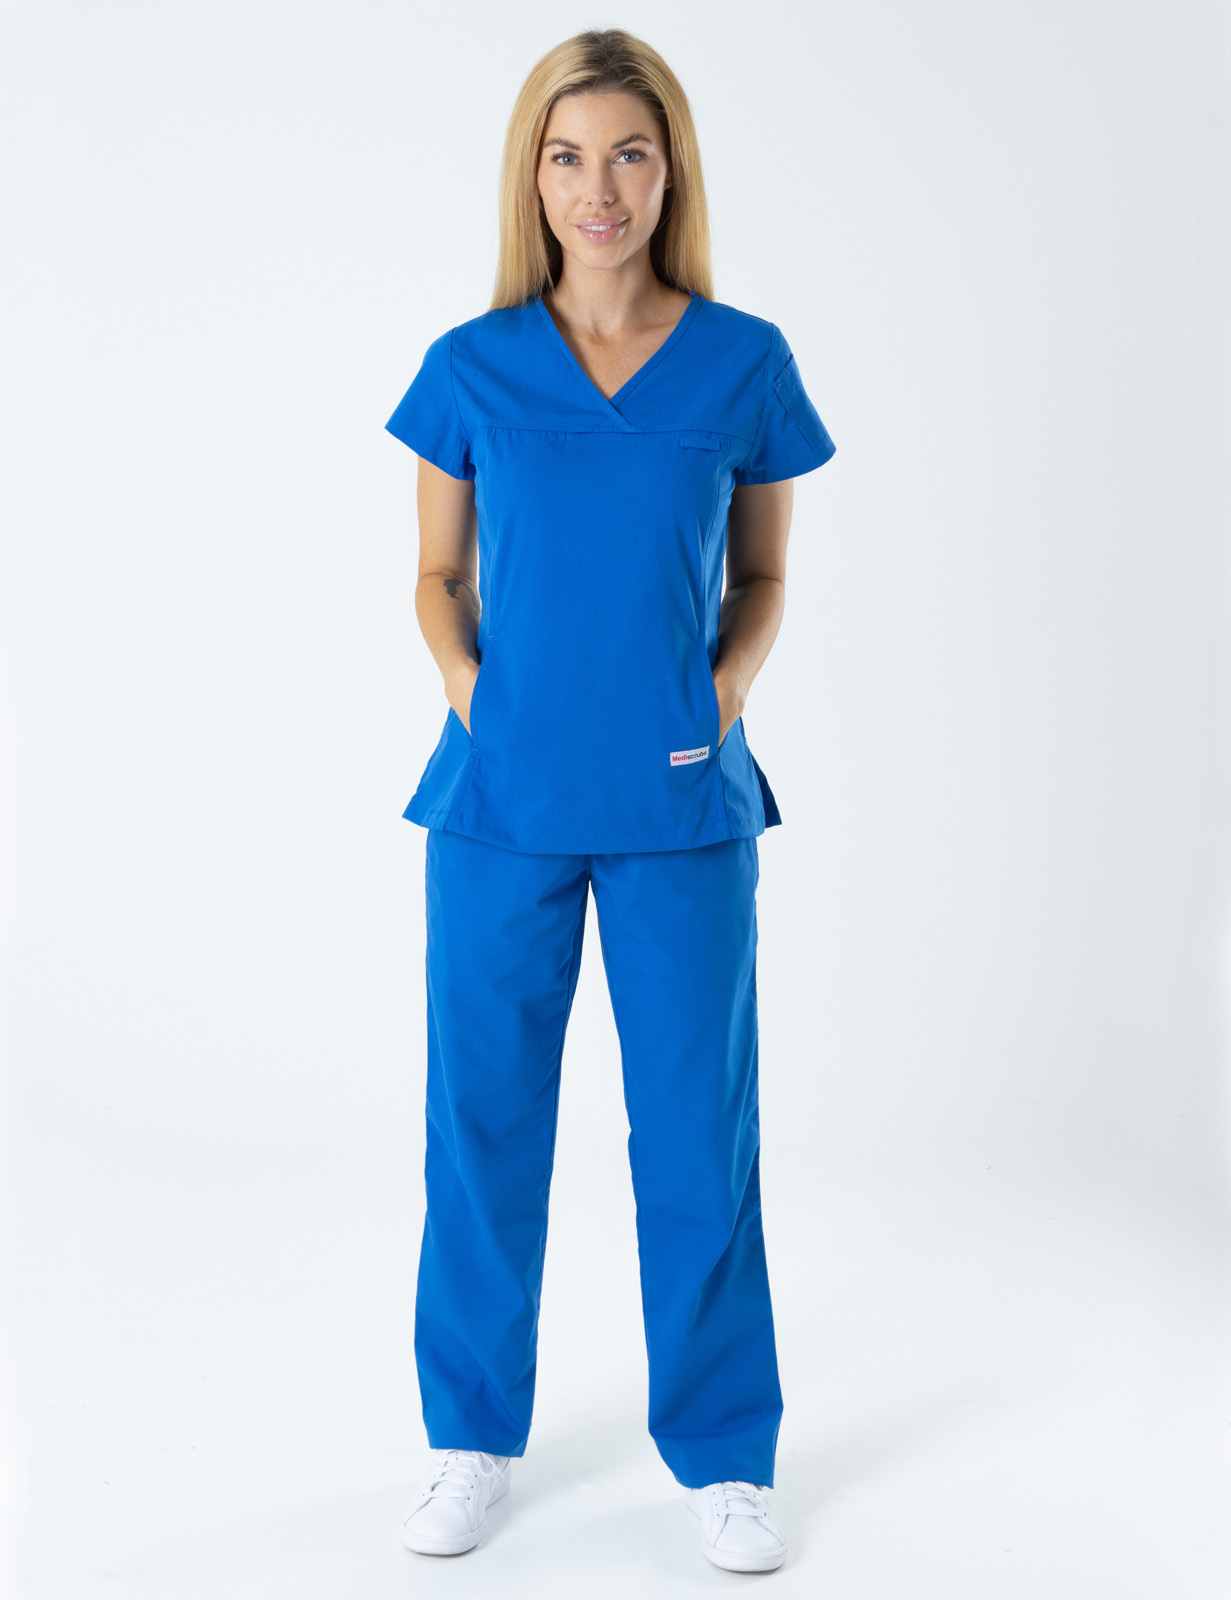 RBWH - IMS CCU RN (Women's Fit Solid Scrub Top and Cargo Pants in Royal incl Logos)